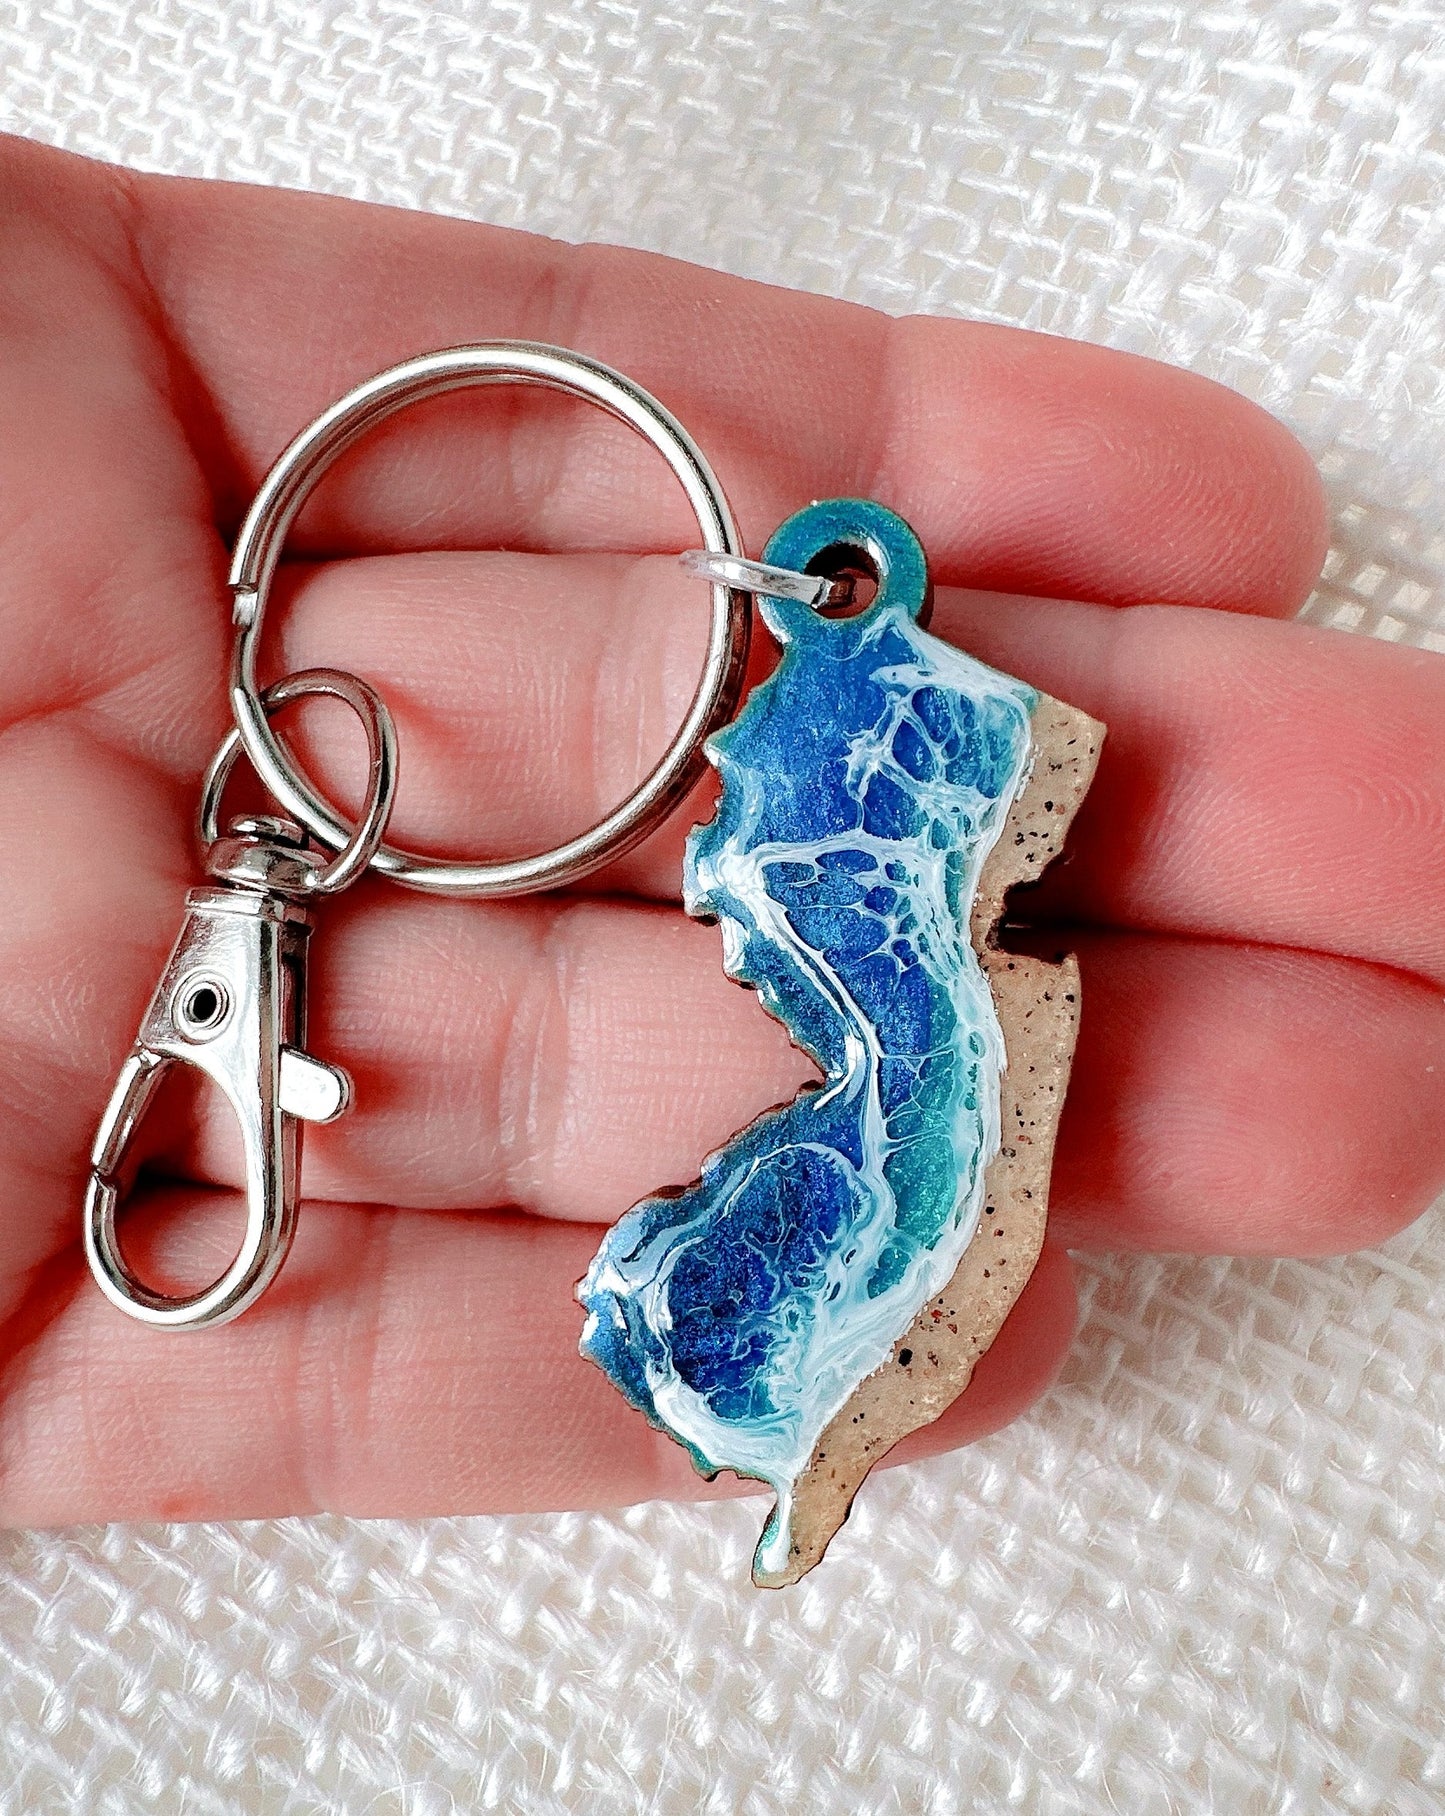 PRE-ORDER “Catch the Waves” Wooden Key Chains